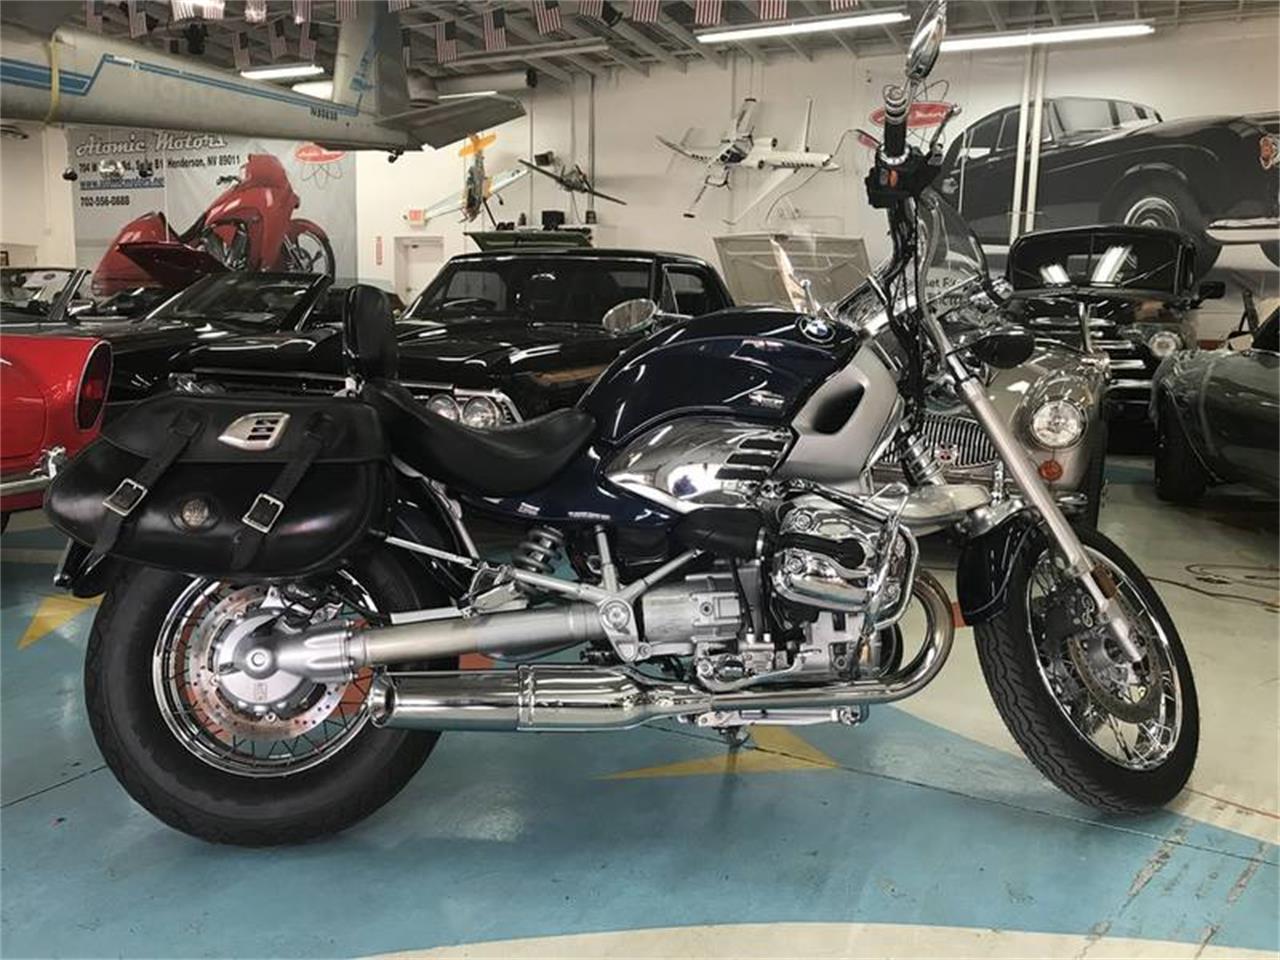 1998 BMW Motorcycle for Sale | ClassicCars.com | CC-1065423